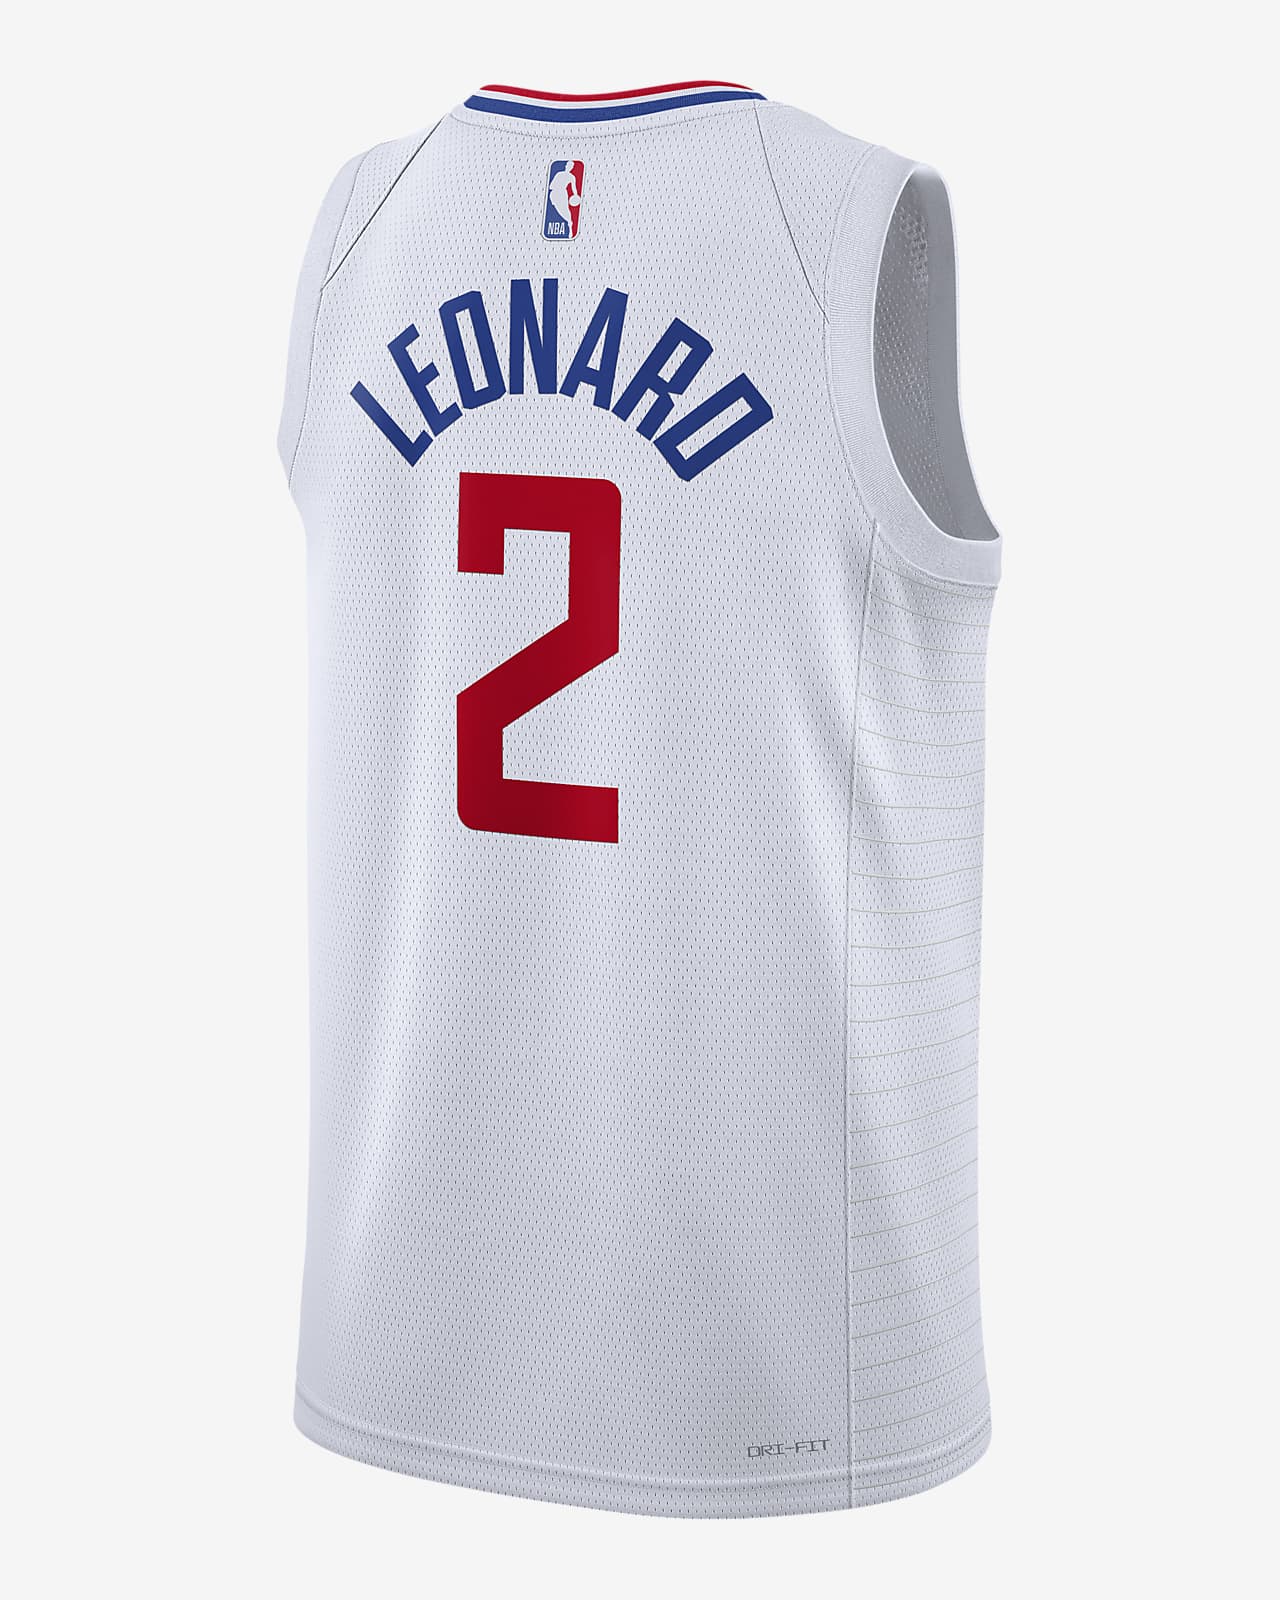 clippers gear